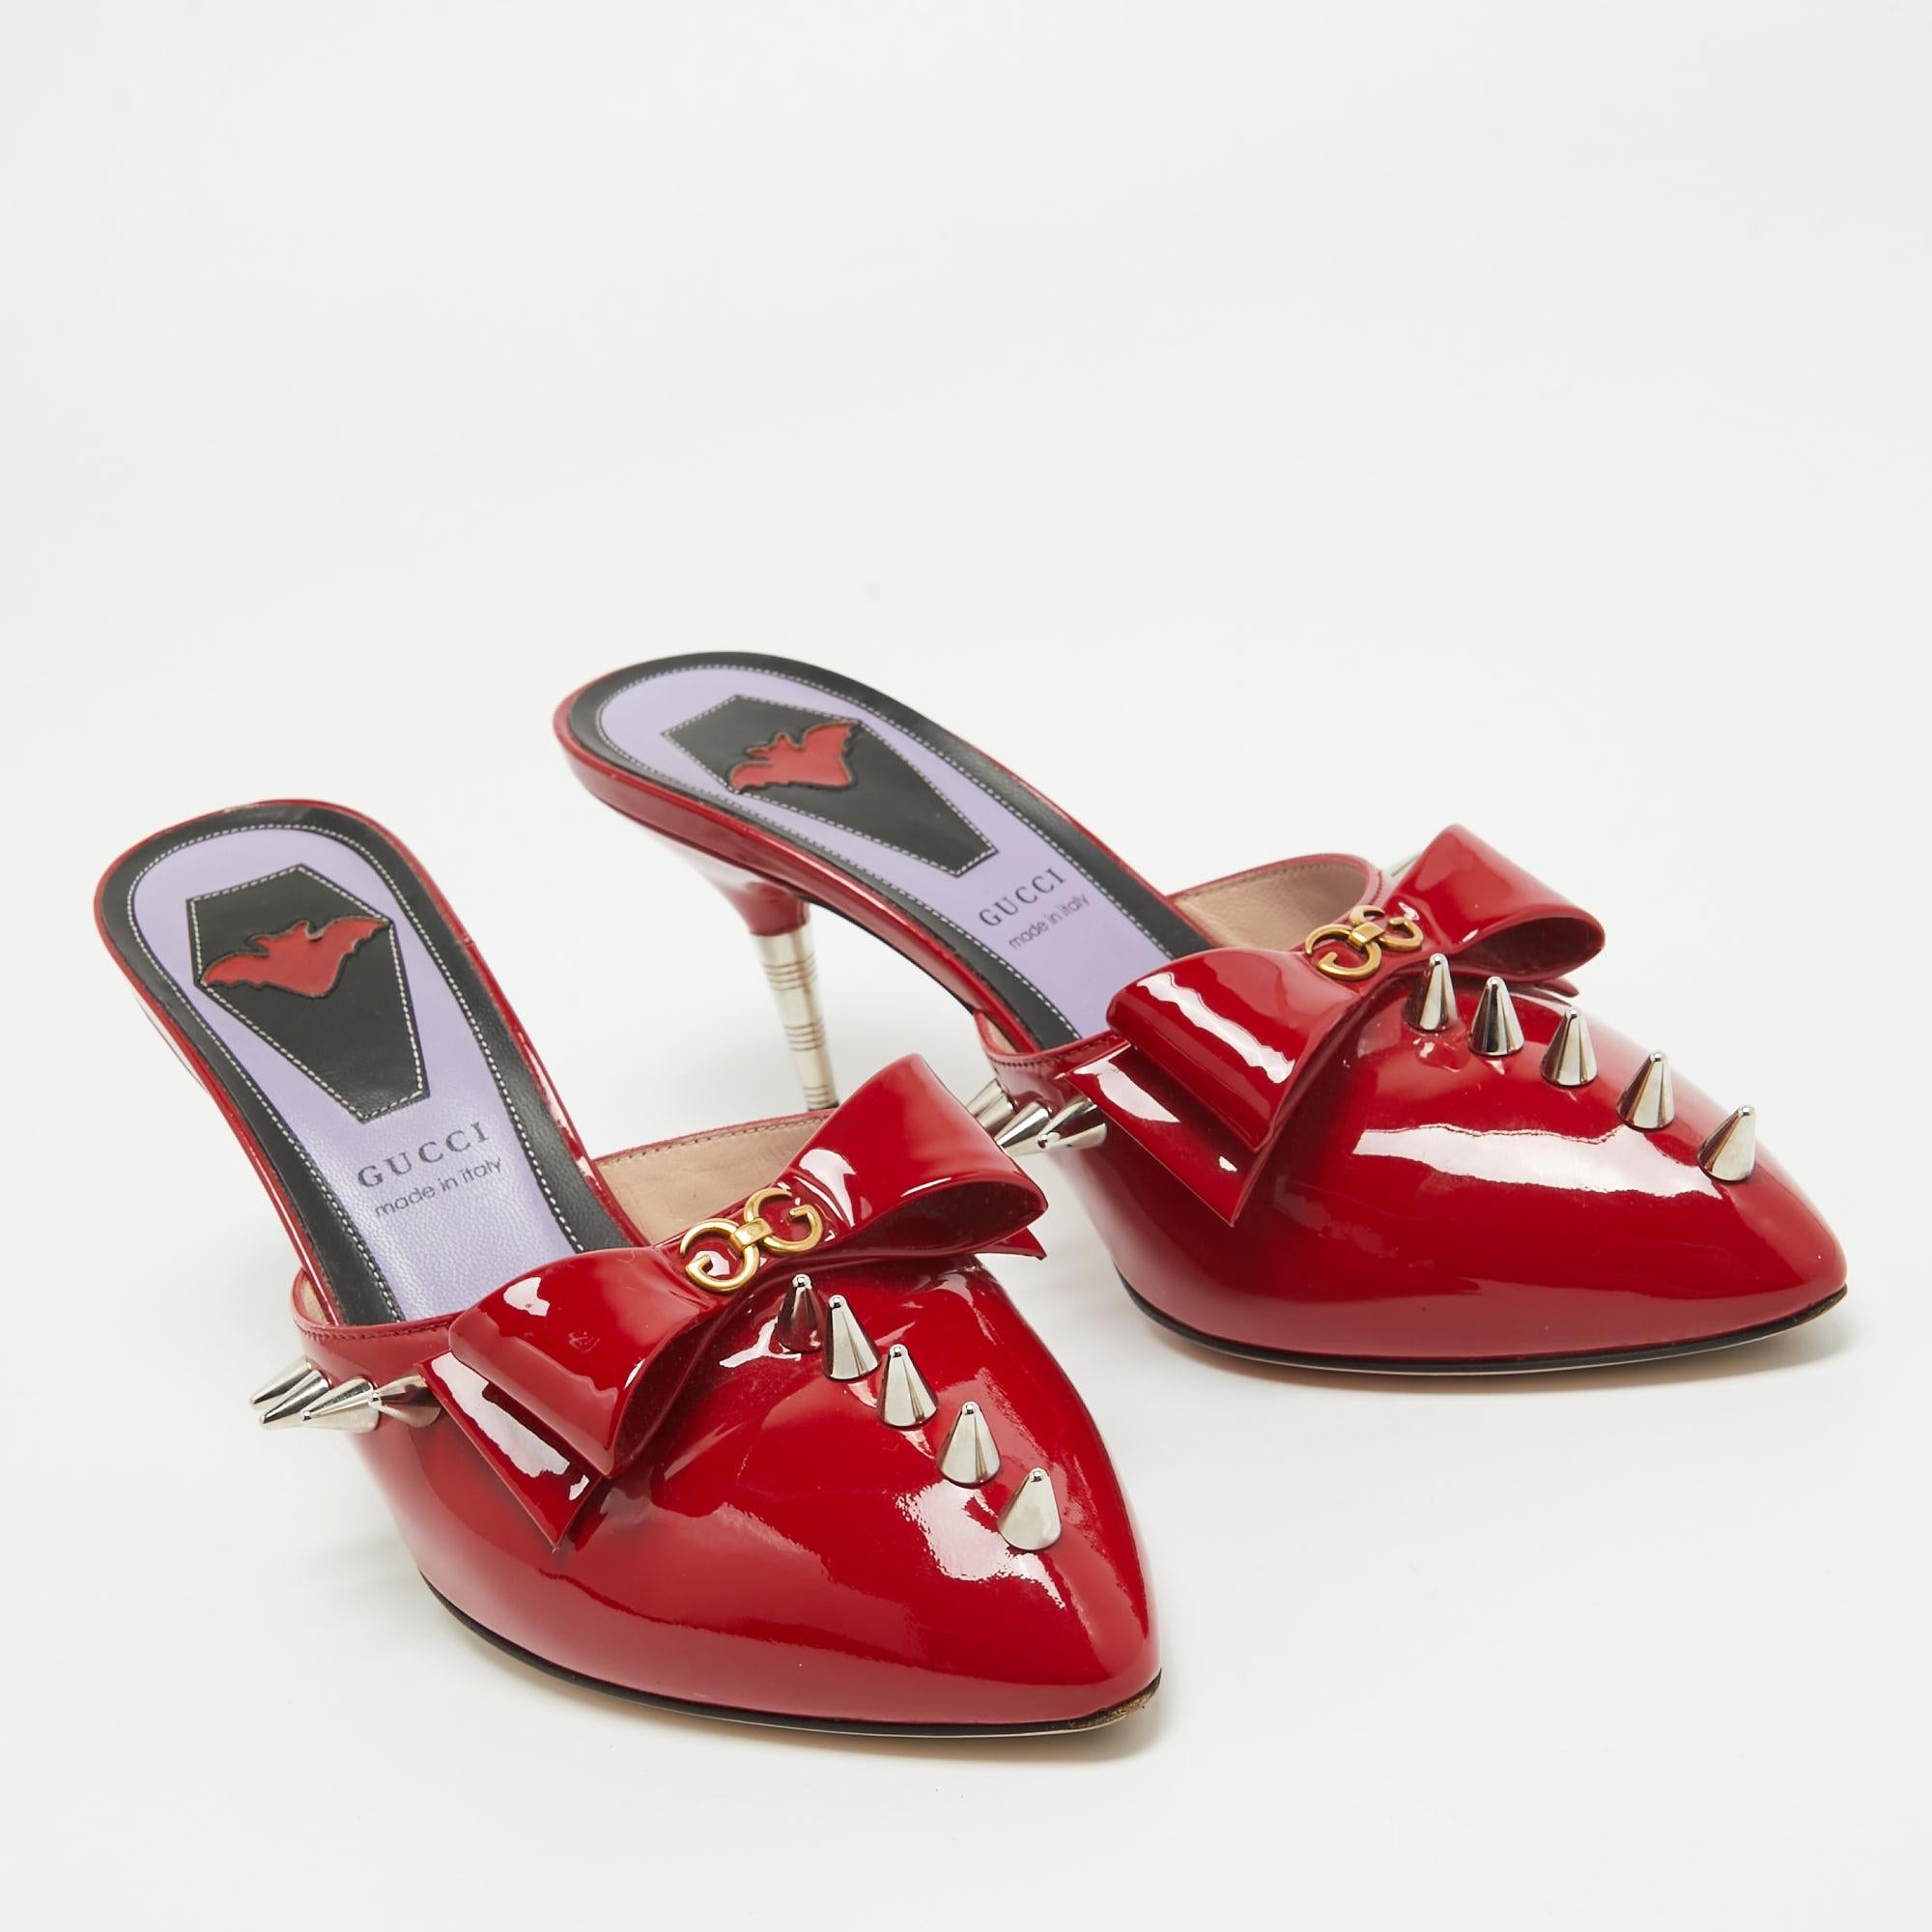 Characterized by edgy spike details, these Gucci mules are a statement pair and can take your look to a whole new level. They are skillfully crafted from patent leather in a ravishing red hue and feature pointed toes. These sandals offer maximum